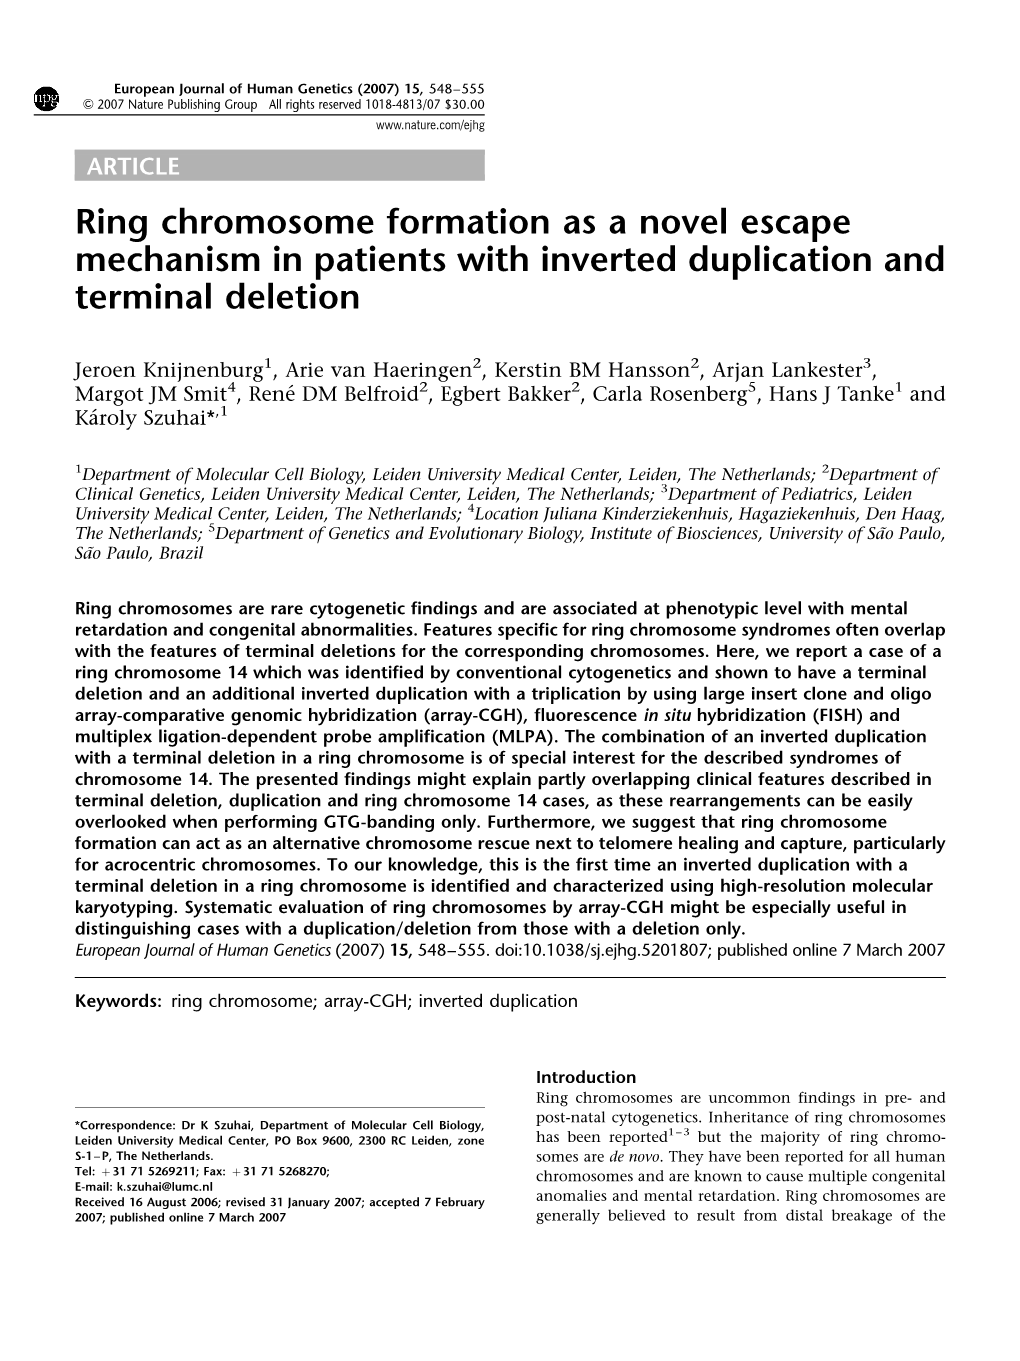 Ring Chromosome Formation As a Novel Escape Mechanism in Patients with Inverted Duplication and Terminal Deletion